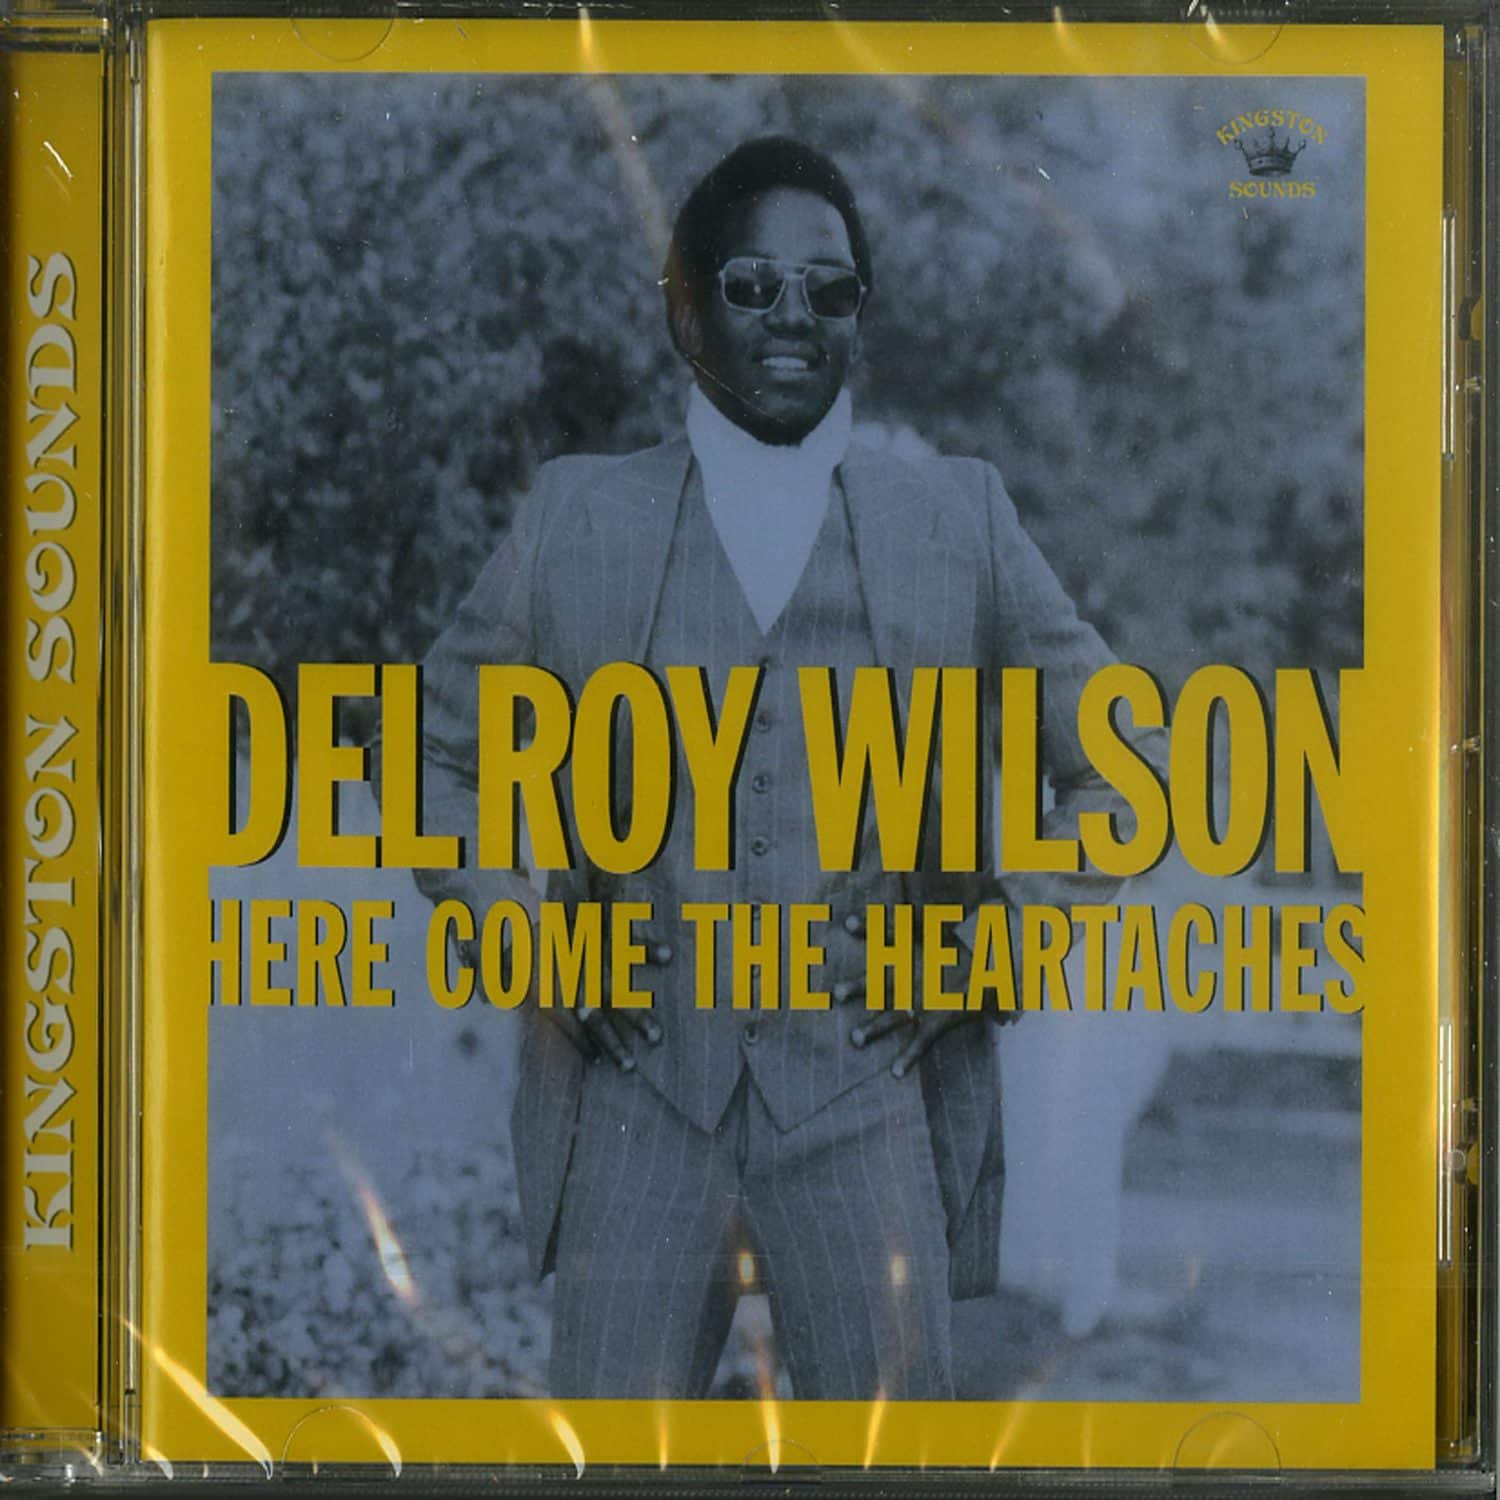 Delroy Wilson - HERE COME THE HEARTACHES 